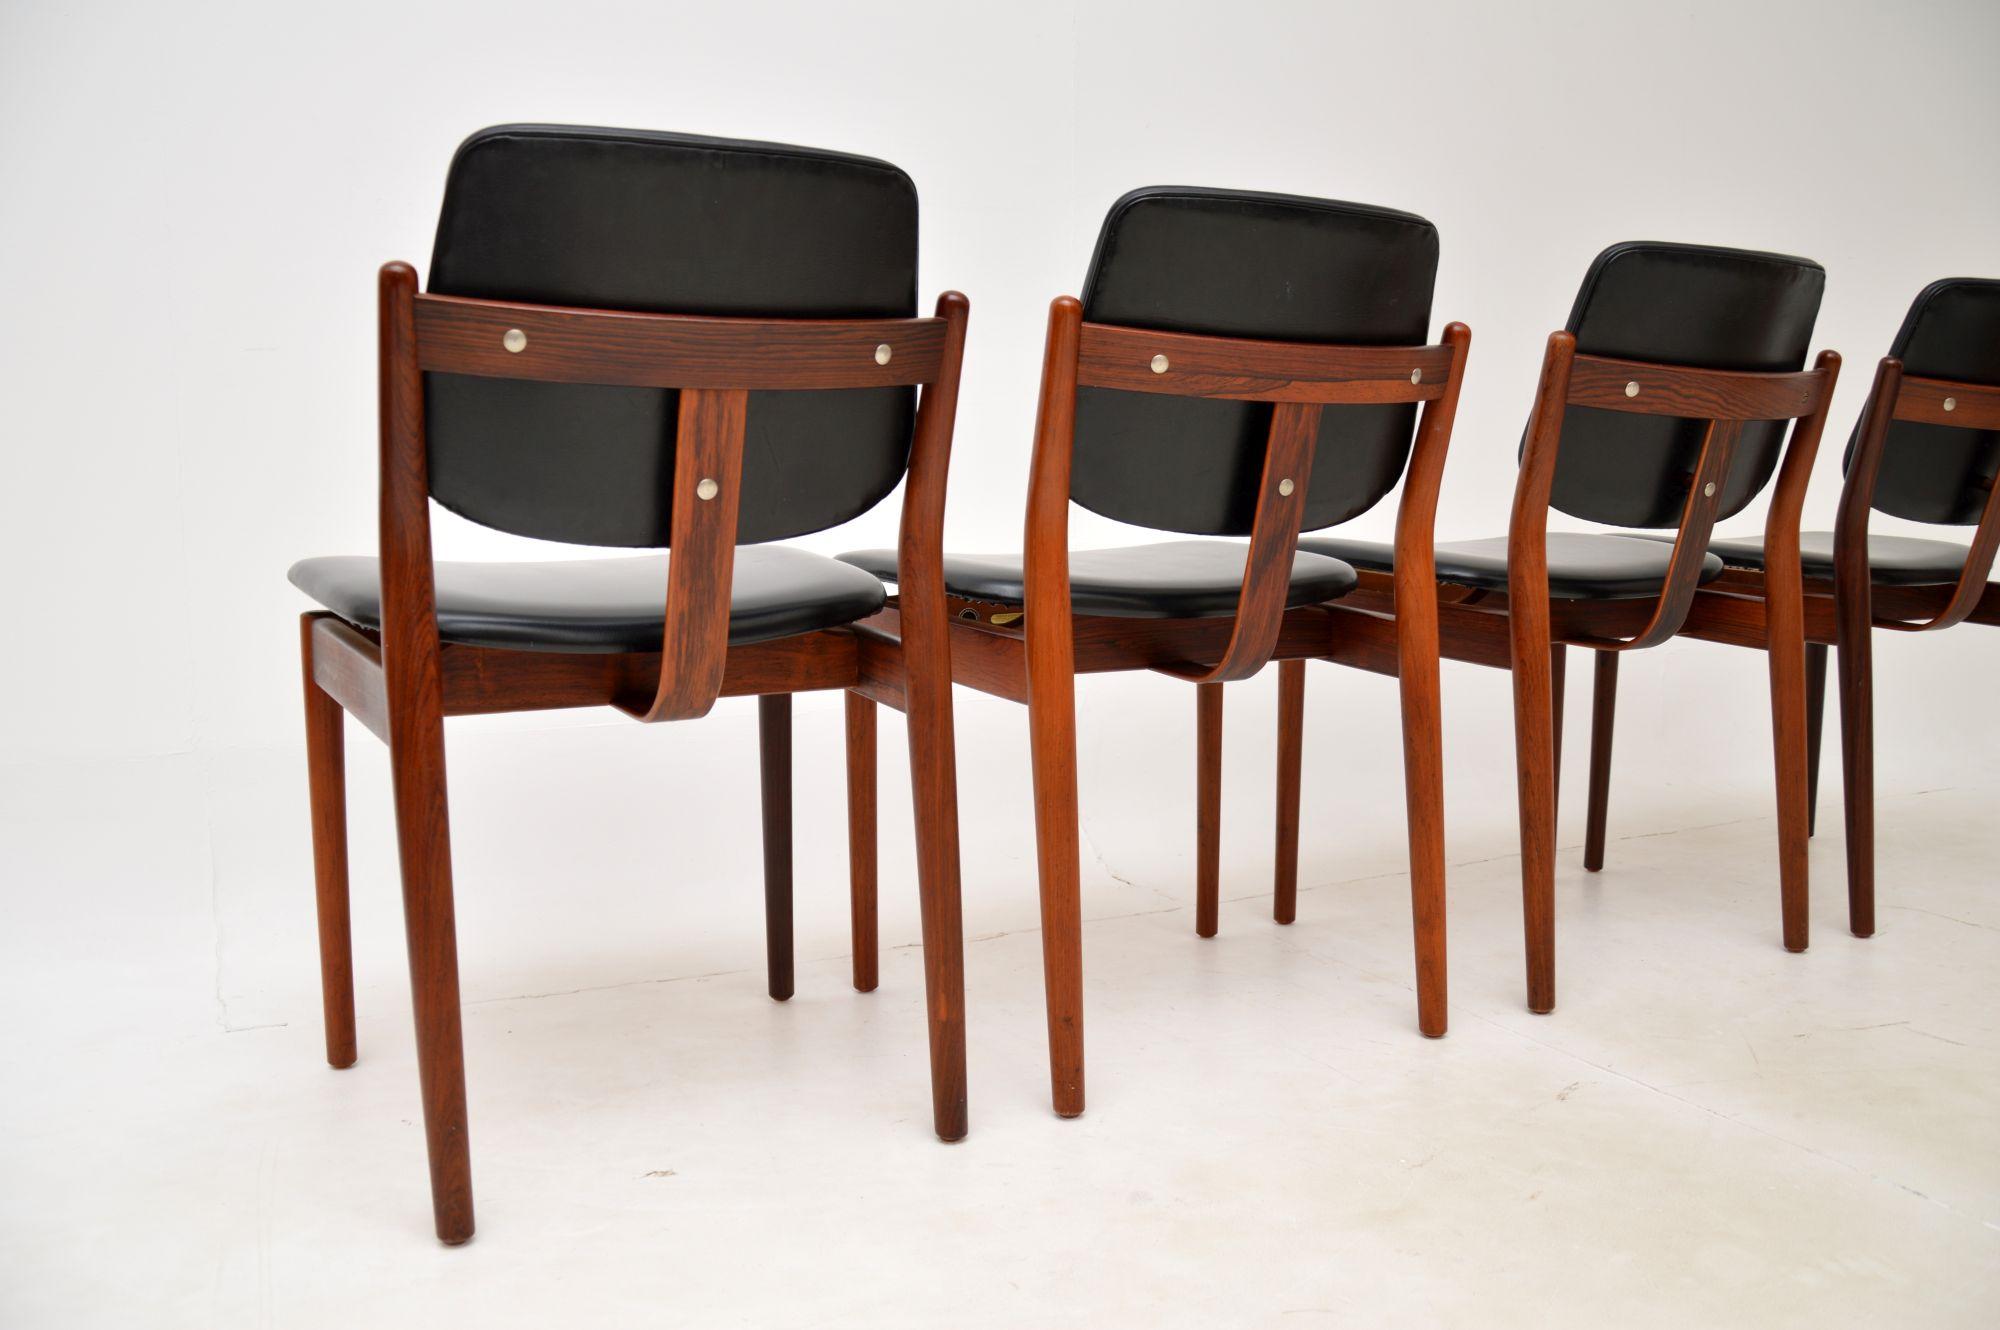 Plastic 1960s Set of 4 Danish Dining Chairs by Borge Rammeskov for Sibast